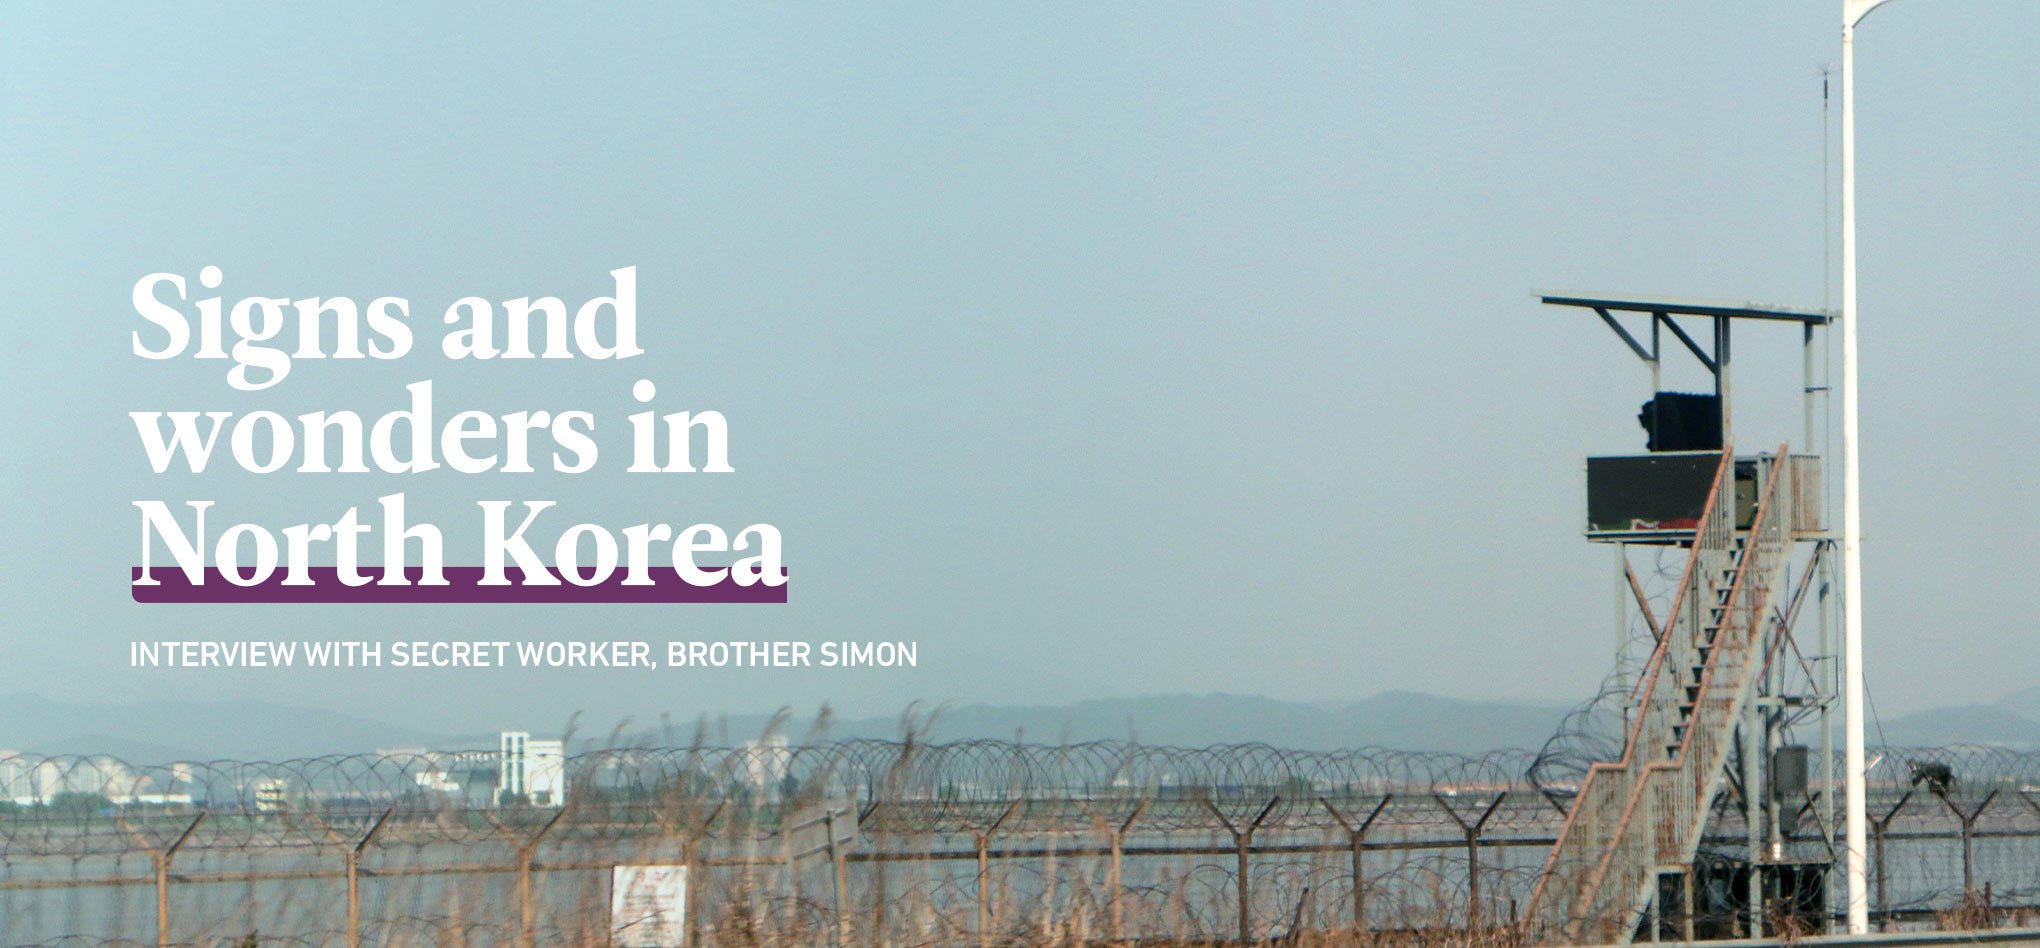 Signs and wonders in North Korea